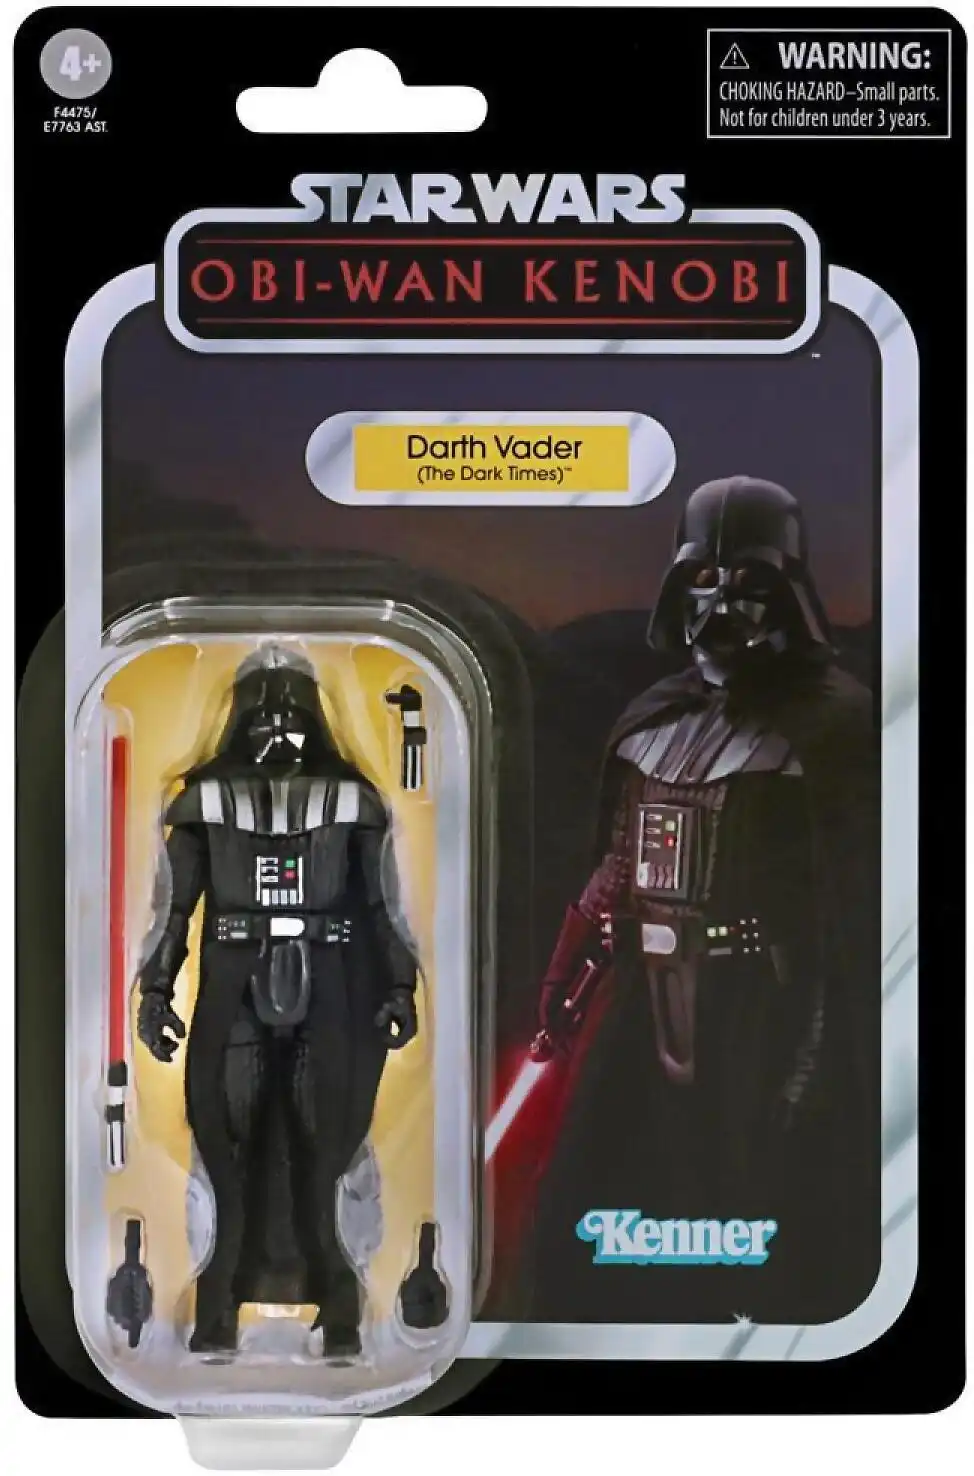 Star Wars - The Vintage Collection Darth Vader (the Dark Times) Toy 3.75-inch-scale Star Wars: Obi-wan Kenobi Figure Toys